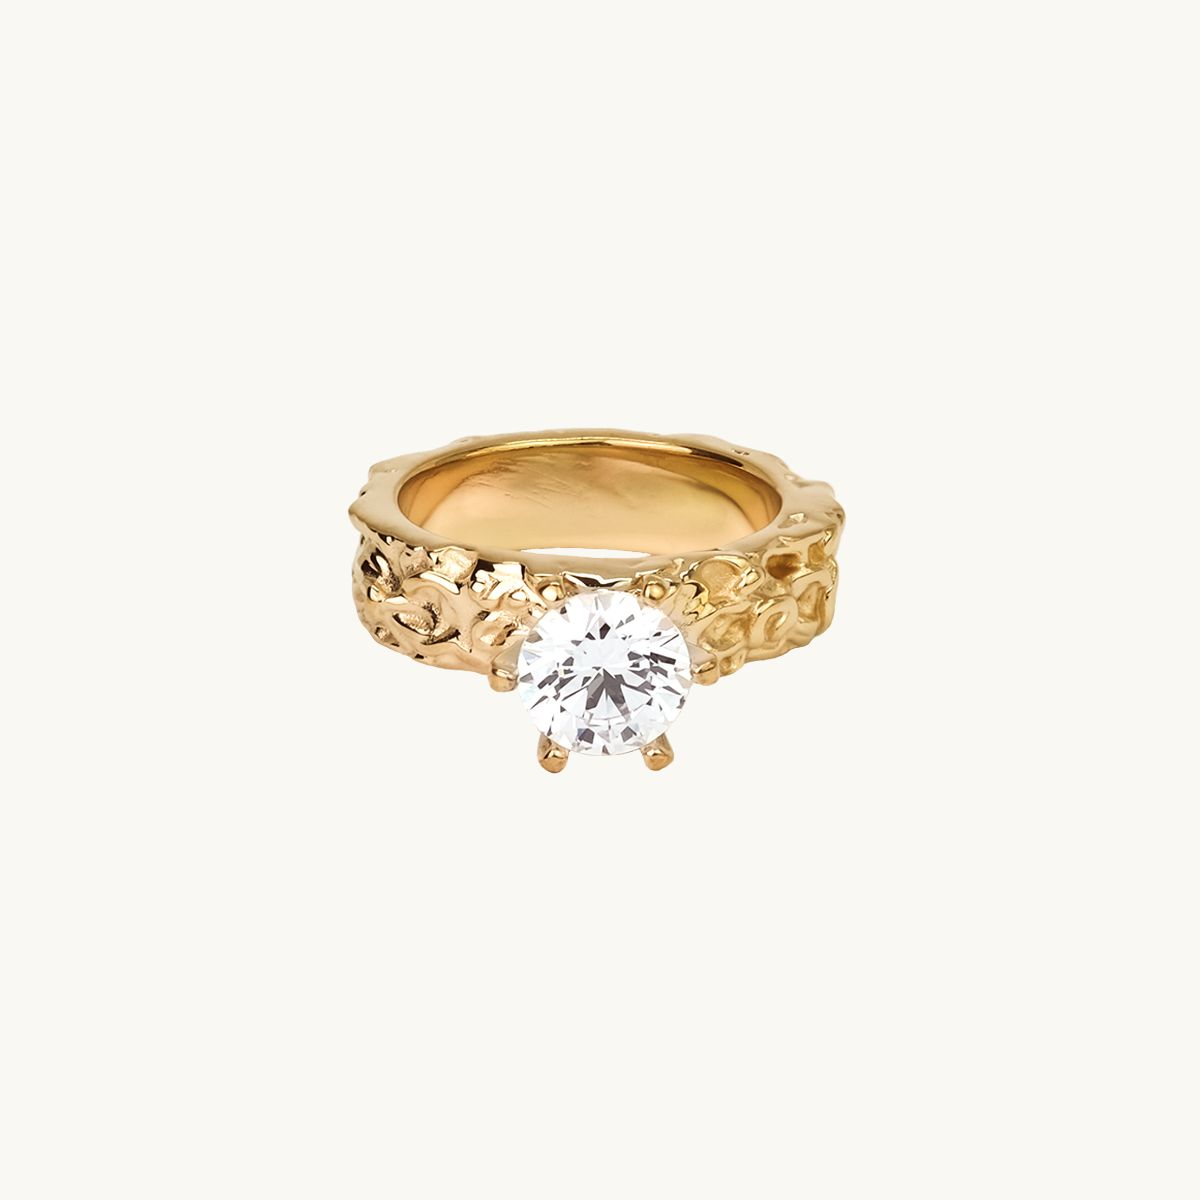 Princess ring in gold plated brass with white stone